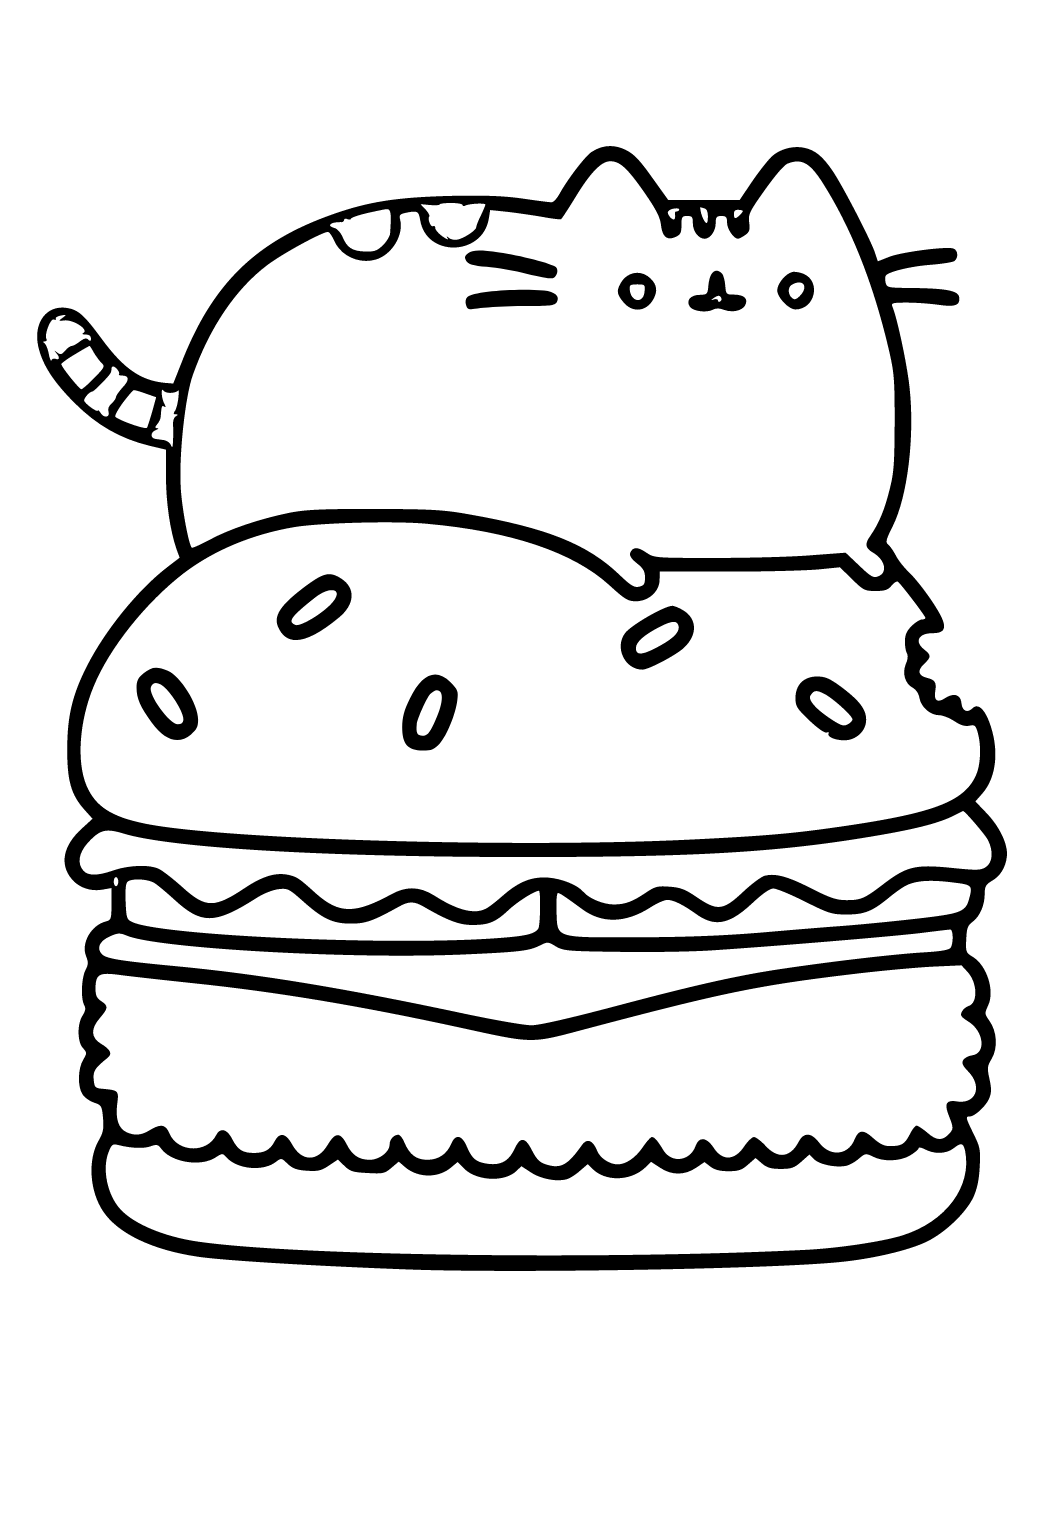 Free printable pusheen hamburger coloring page for adults and kids